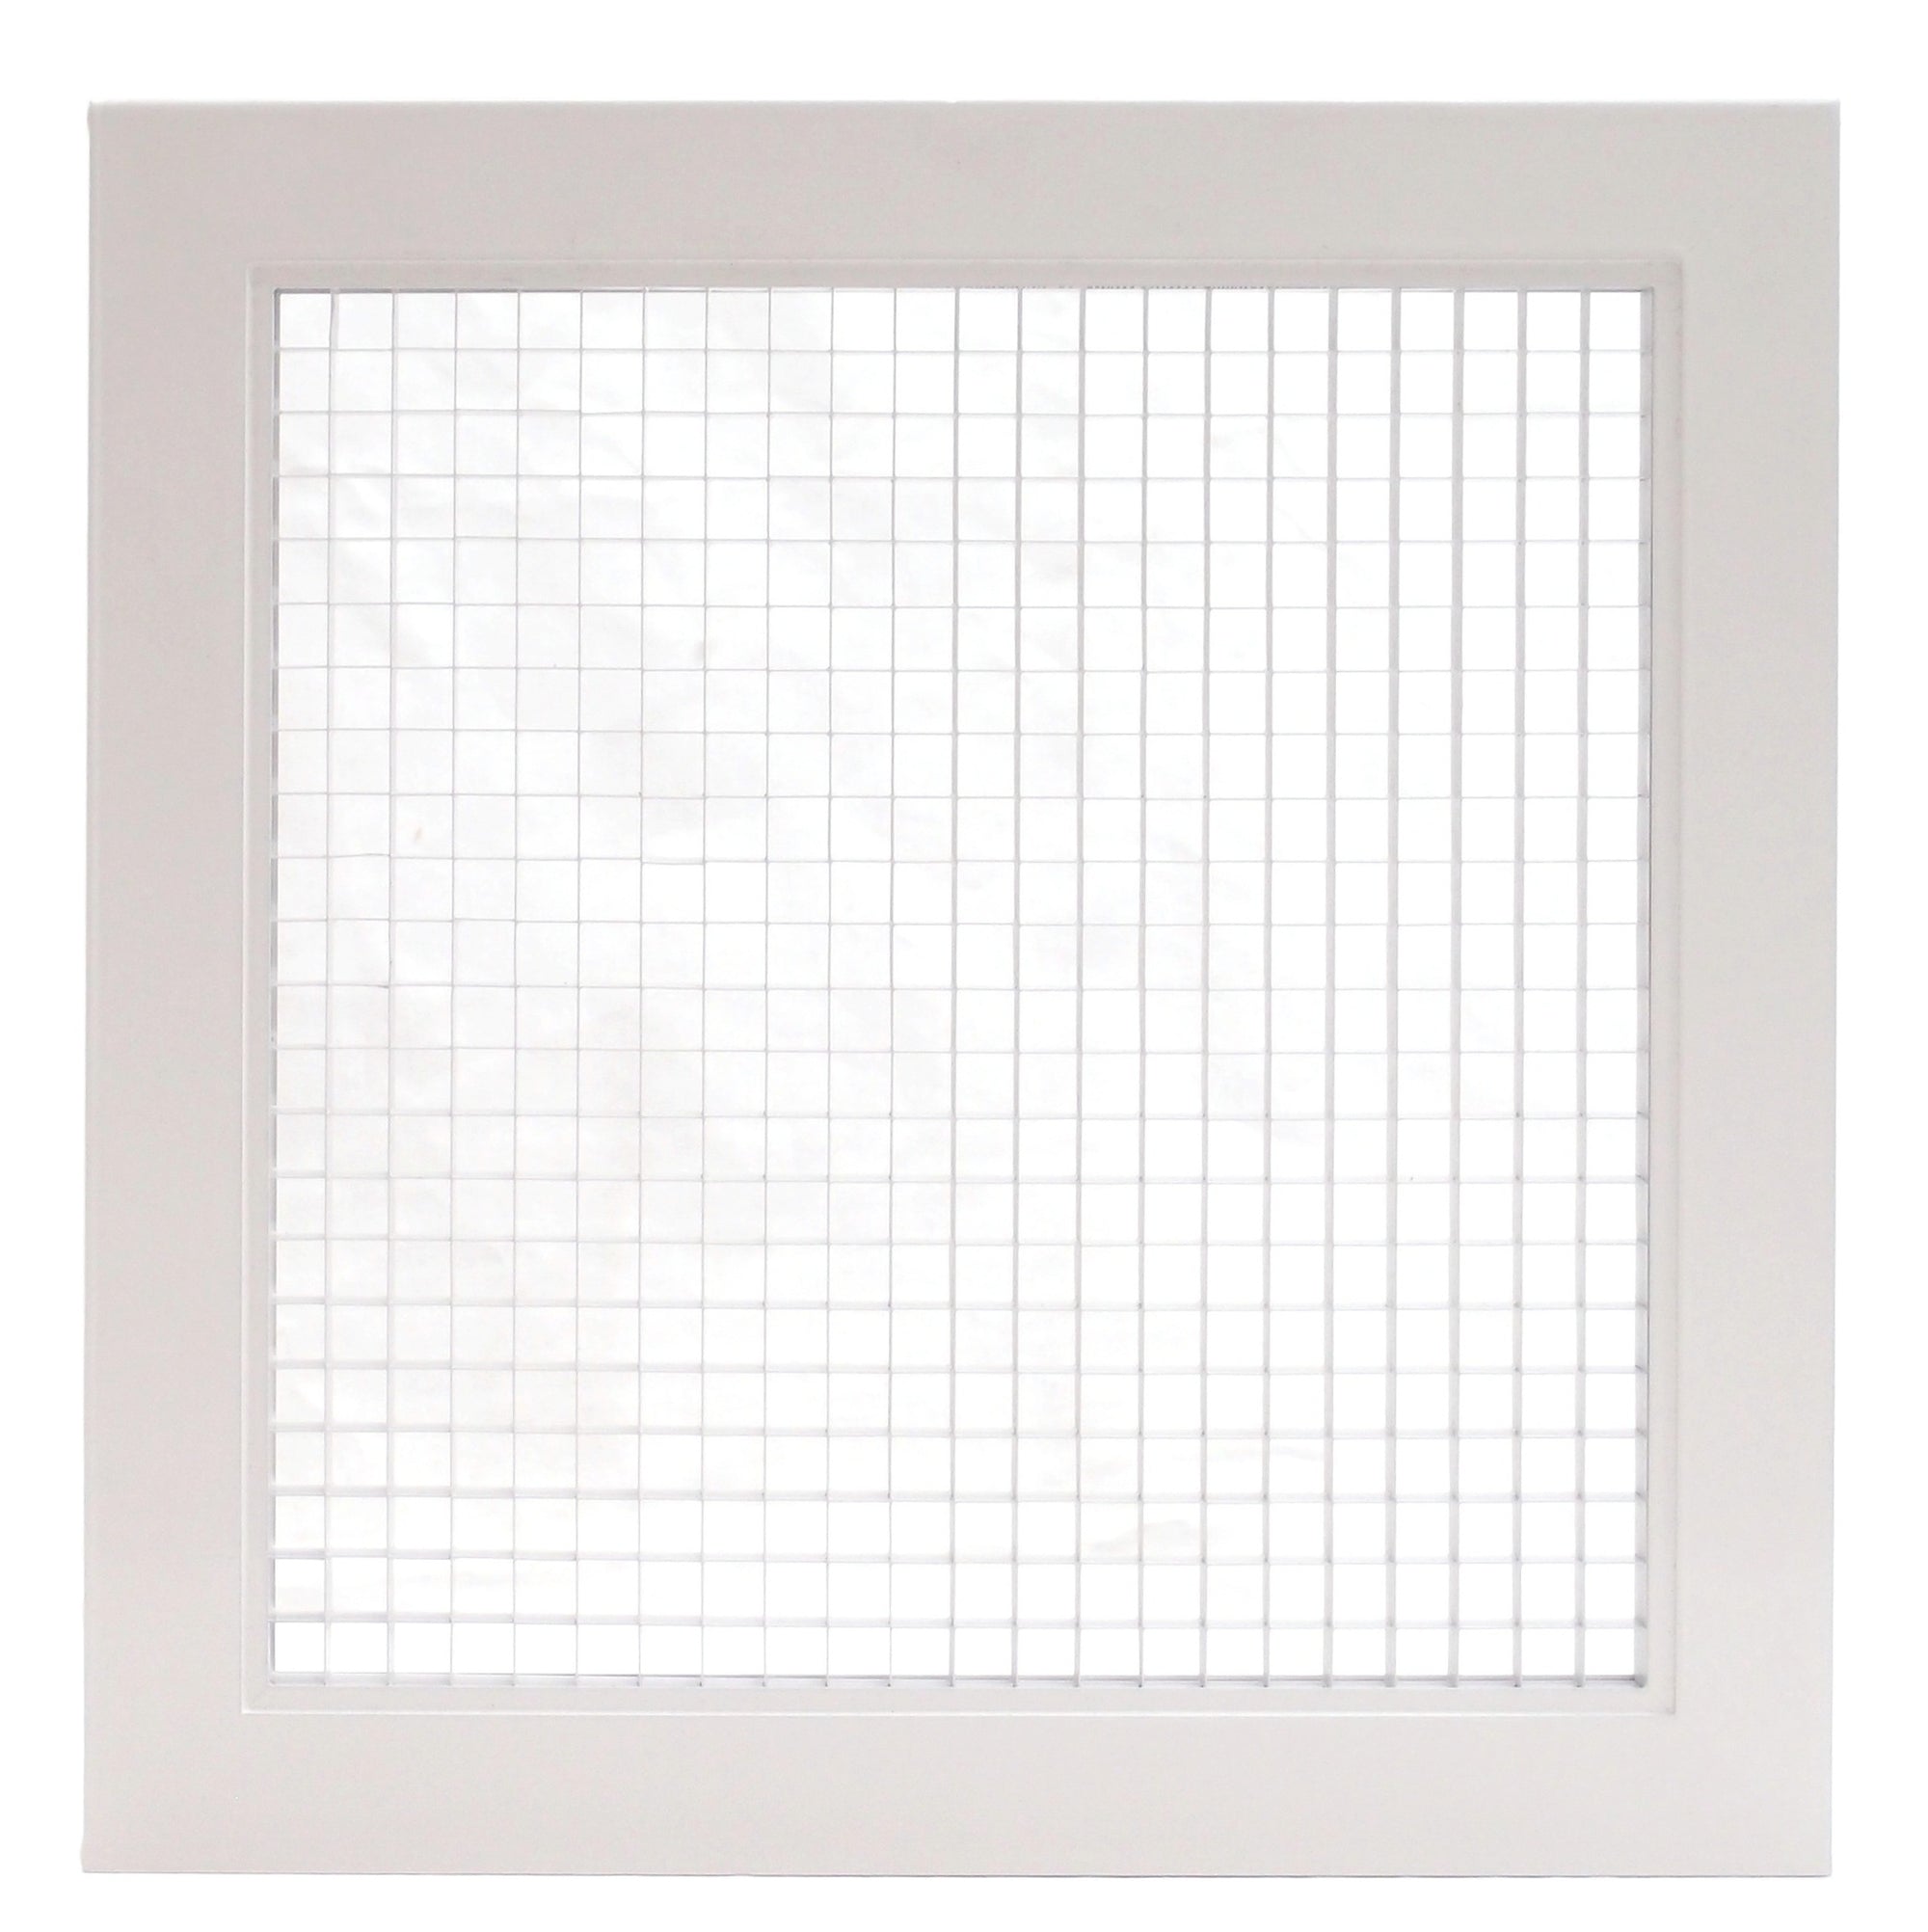 34" x 8" Cube Core Eggcrate Return Air Filter Grille for 1" Filter